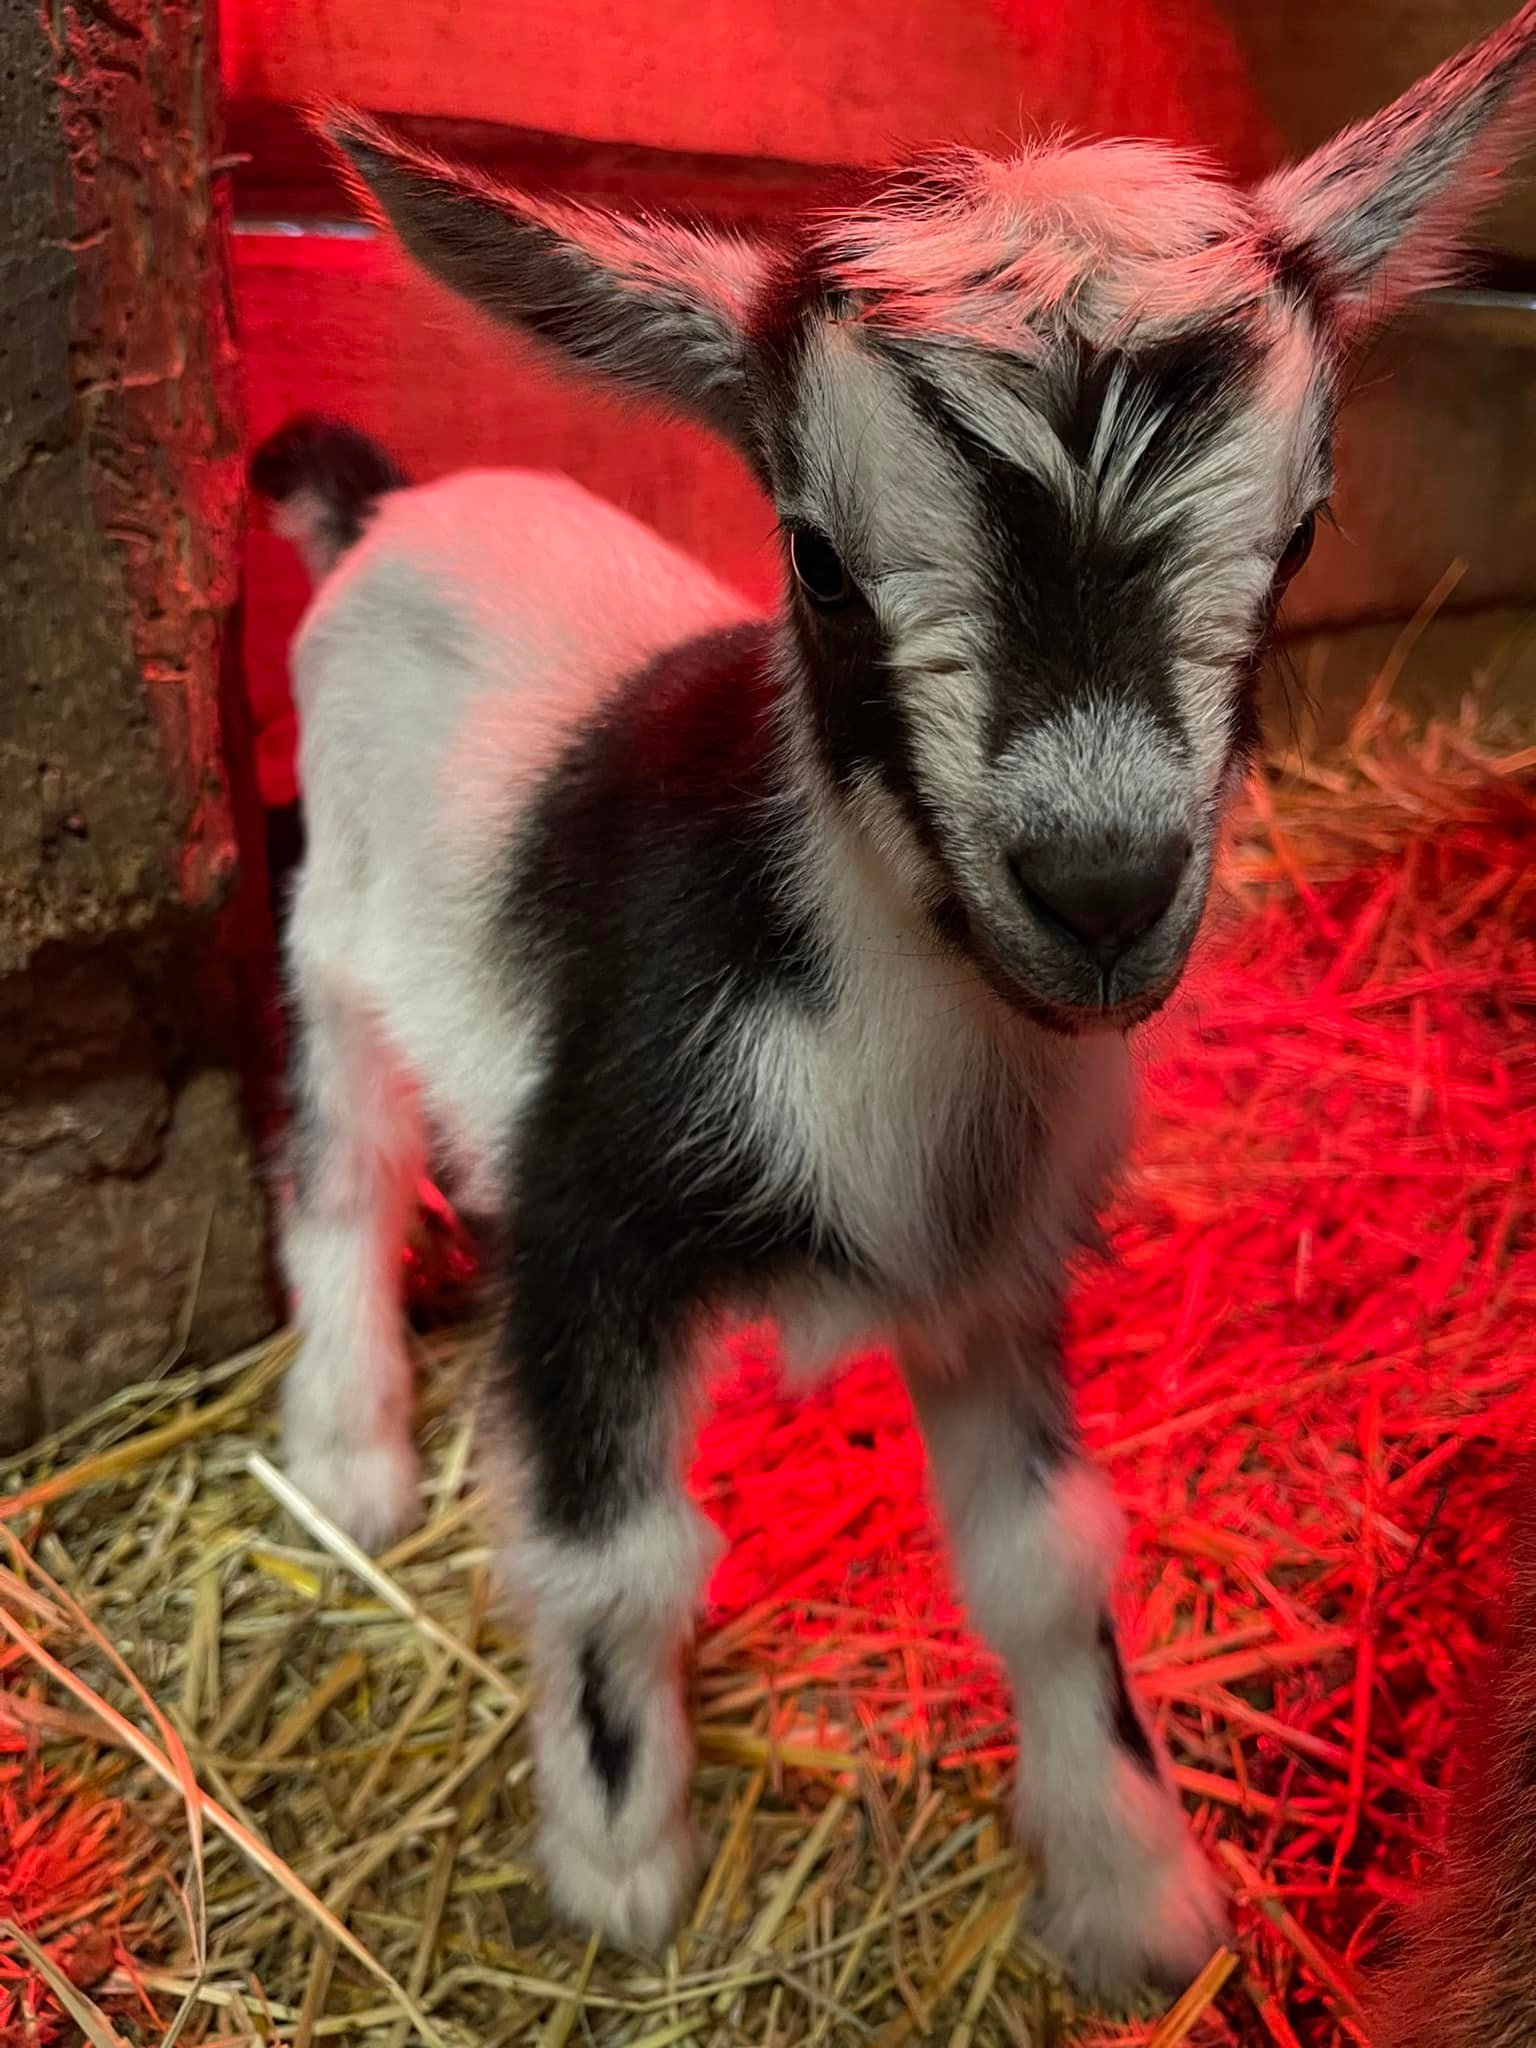 The boys 💙💙 are doing good, but we need your help with selecting names for them!

Comment you name suggestions below⬇️. If your names are selected you will get a free visit with them 🐐🐐 #berkscountypa #berkscounty #lancastercountypa #goats #names